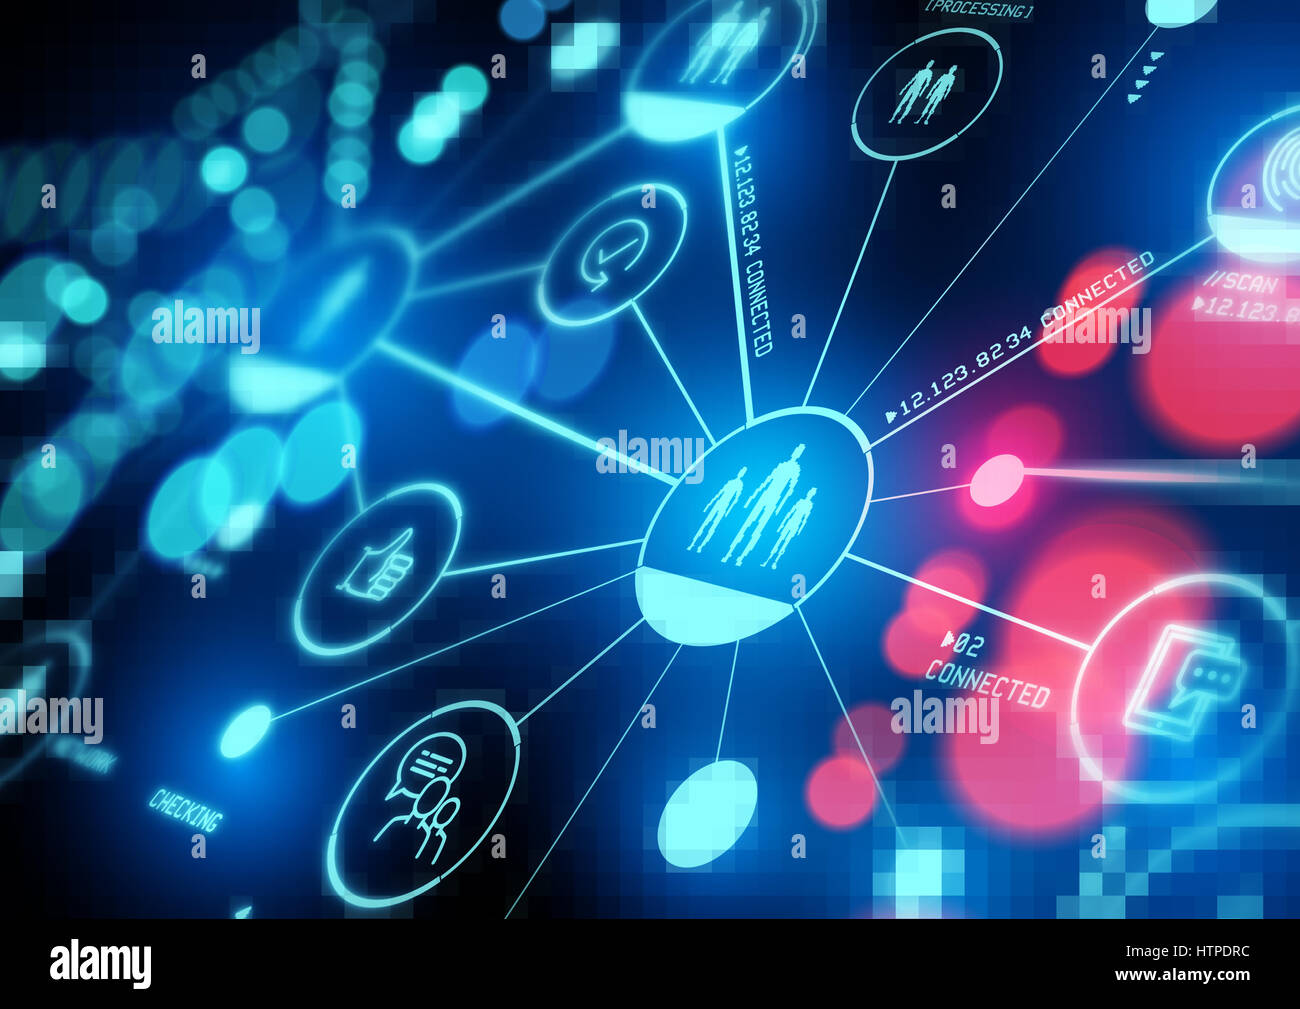 Connected Interests. A closely connected network of people, data and technology. Illustration. Stock Photo